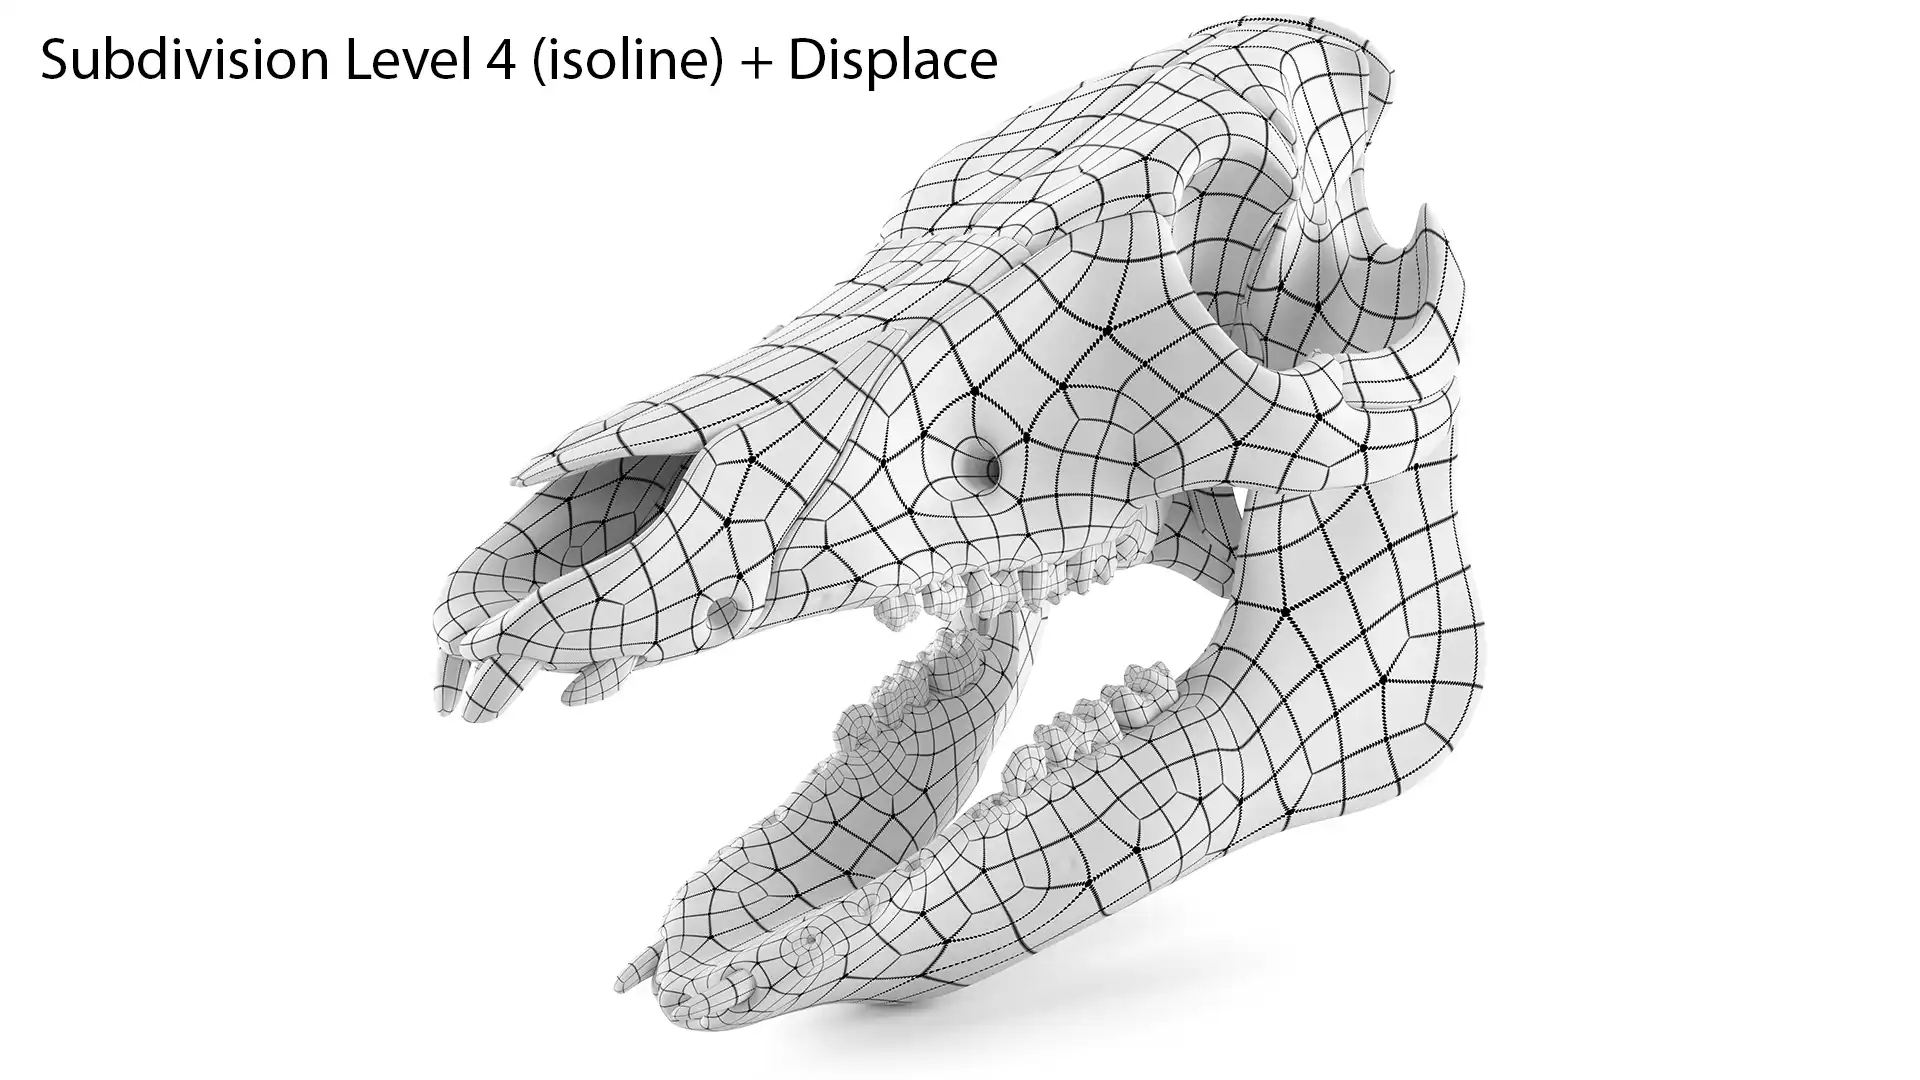 Wireframe rendering on a white background of pig skull 3d model. A turbo smooth subdivision surface with four iterations and displacement modifiers with 16bit displacement map is applied. The wire edges of base mesh shown as isolines.